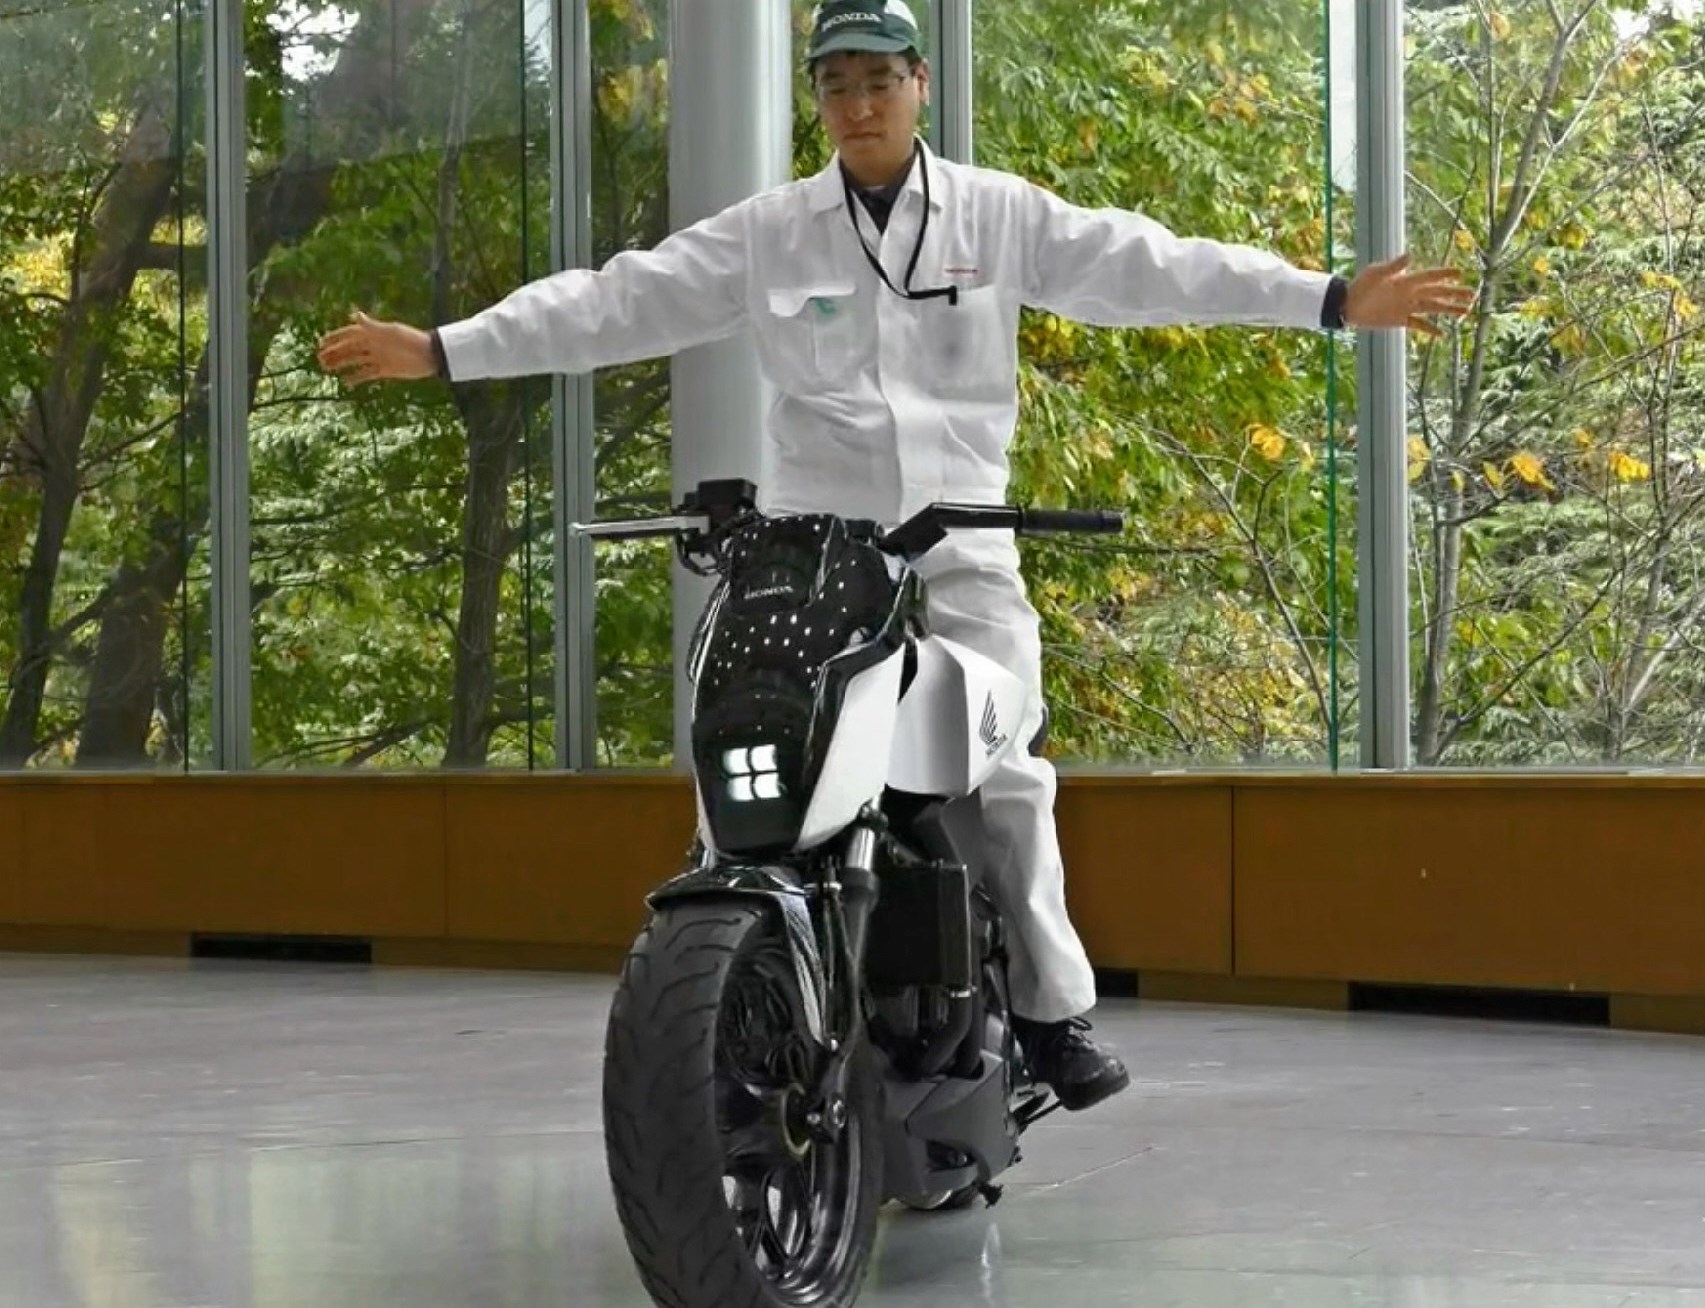 Honda's first self-balancing motorcycle, created to showcase the safety assist technology that they're tweaking in anticipation of collision free future